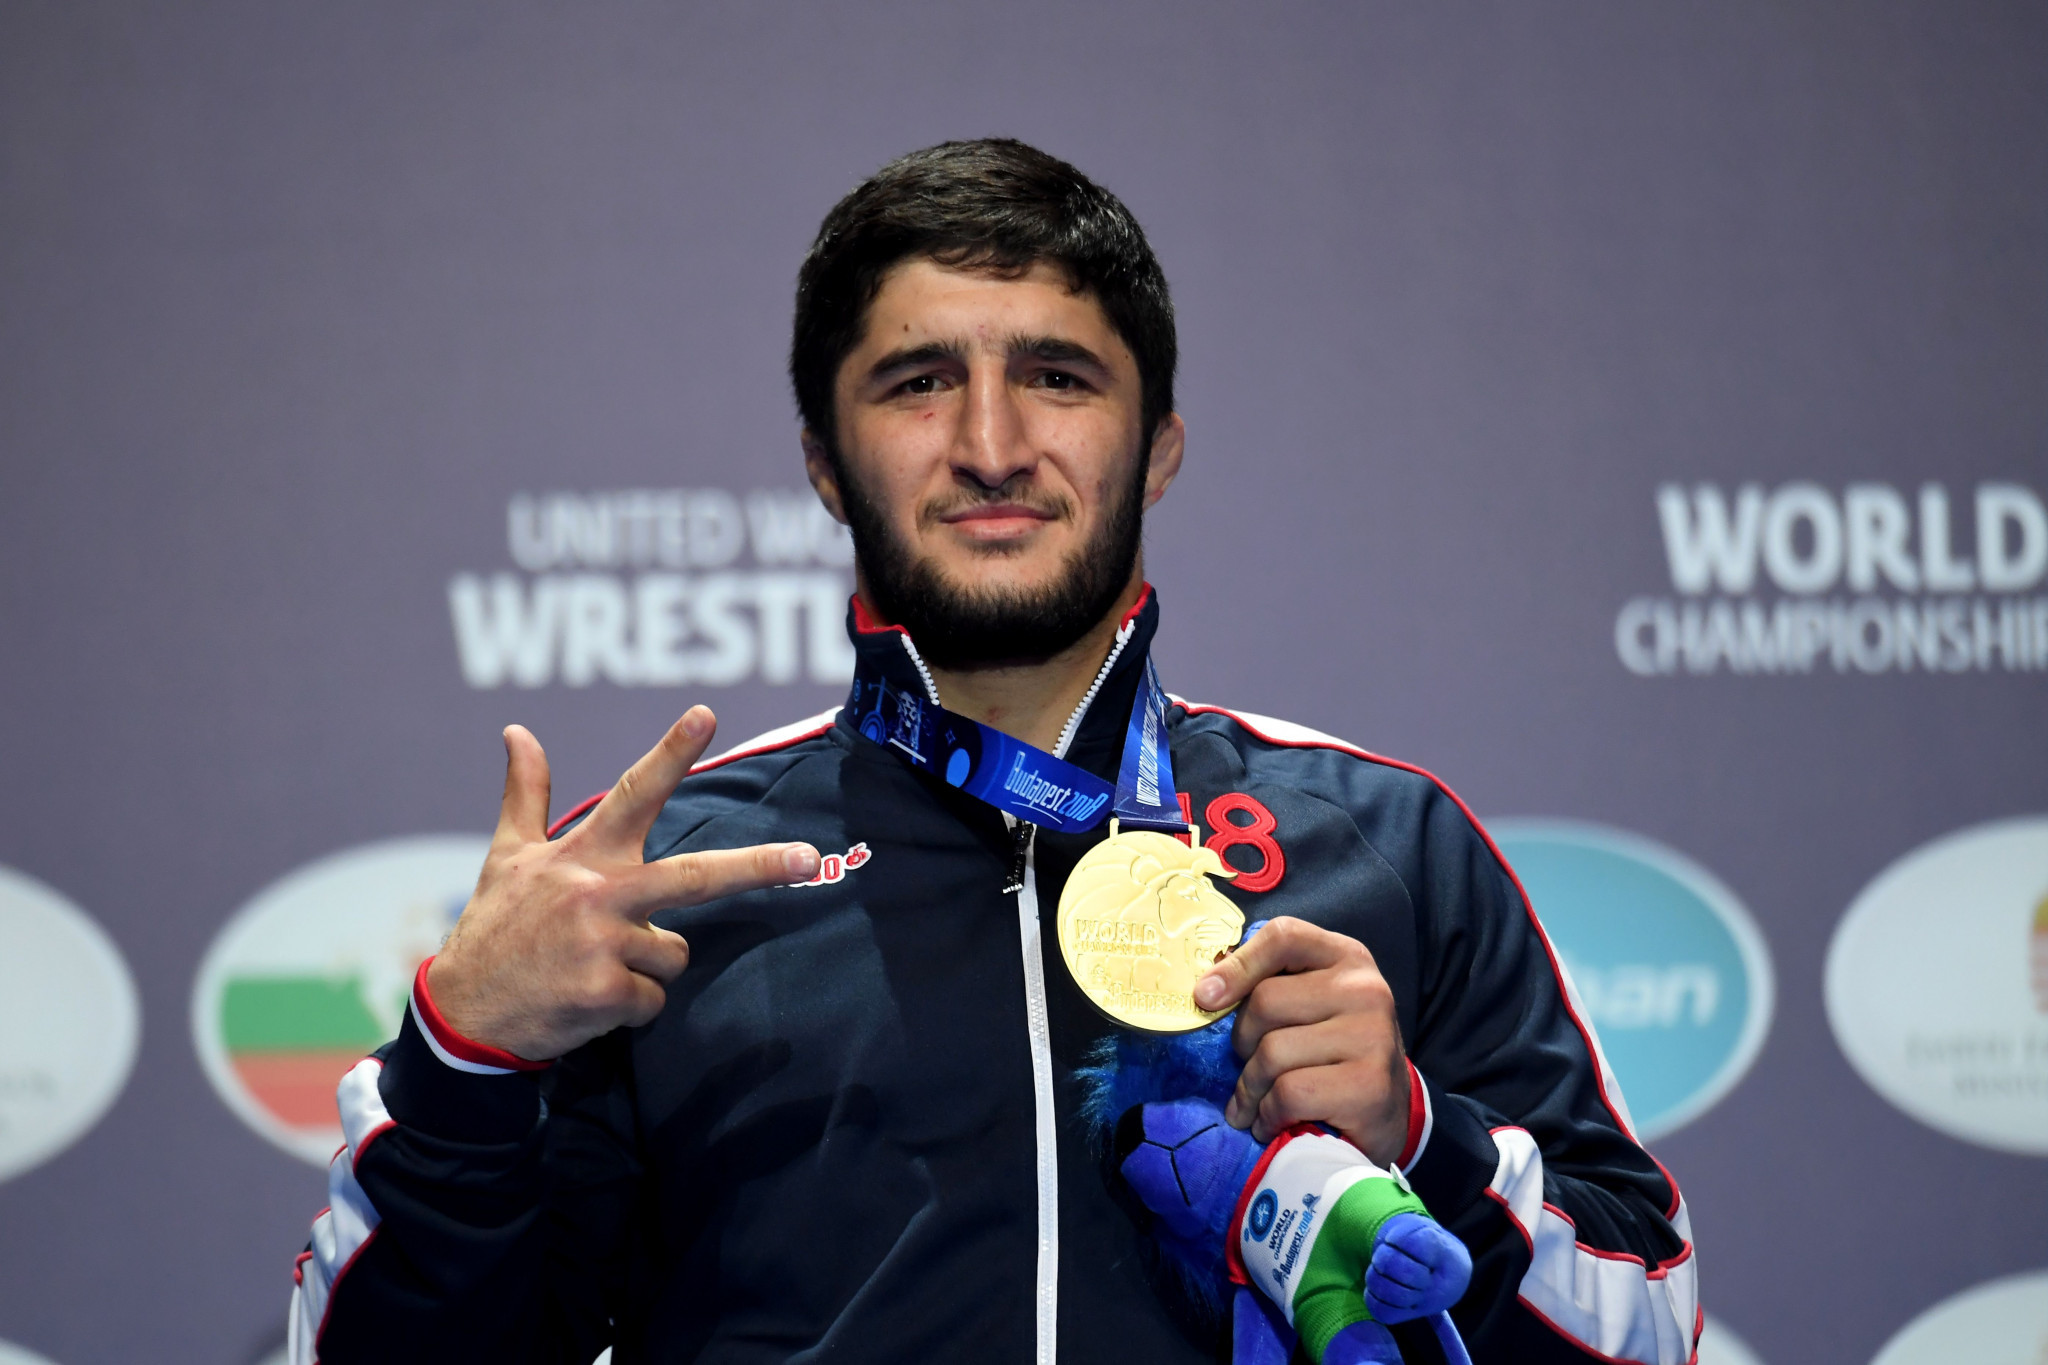 It took Abdulrashid Sadulaev from Russia just 70 seconds to win 